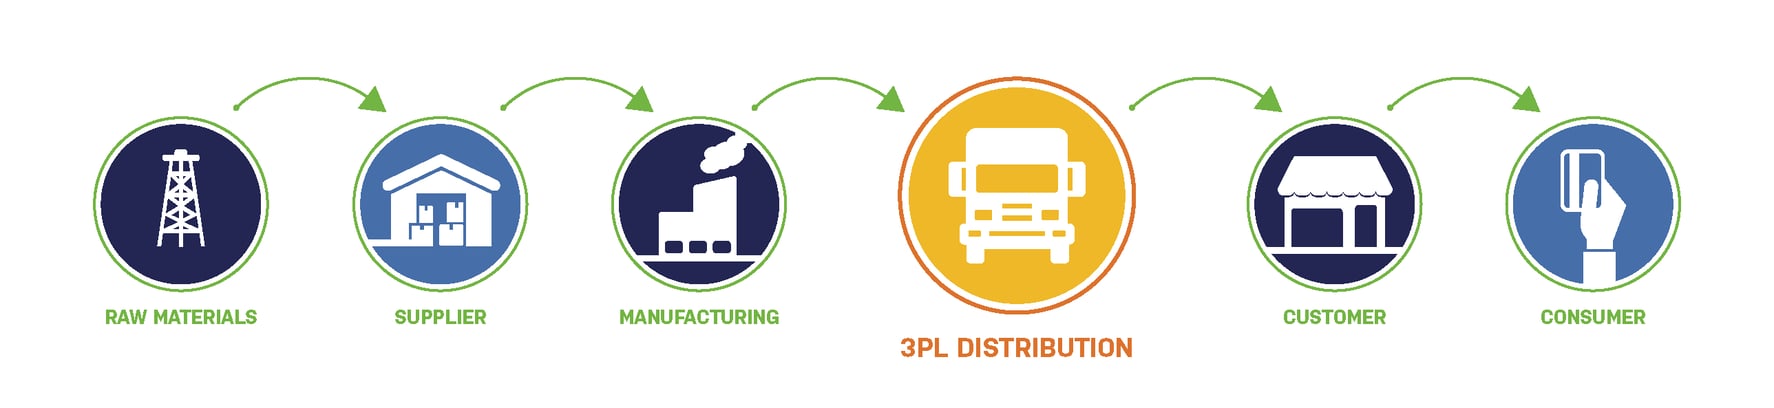 Supply Chain Graphic 3PL